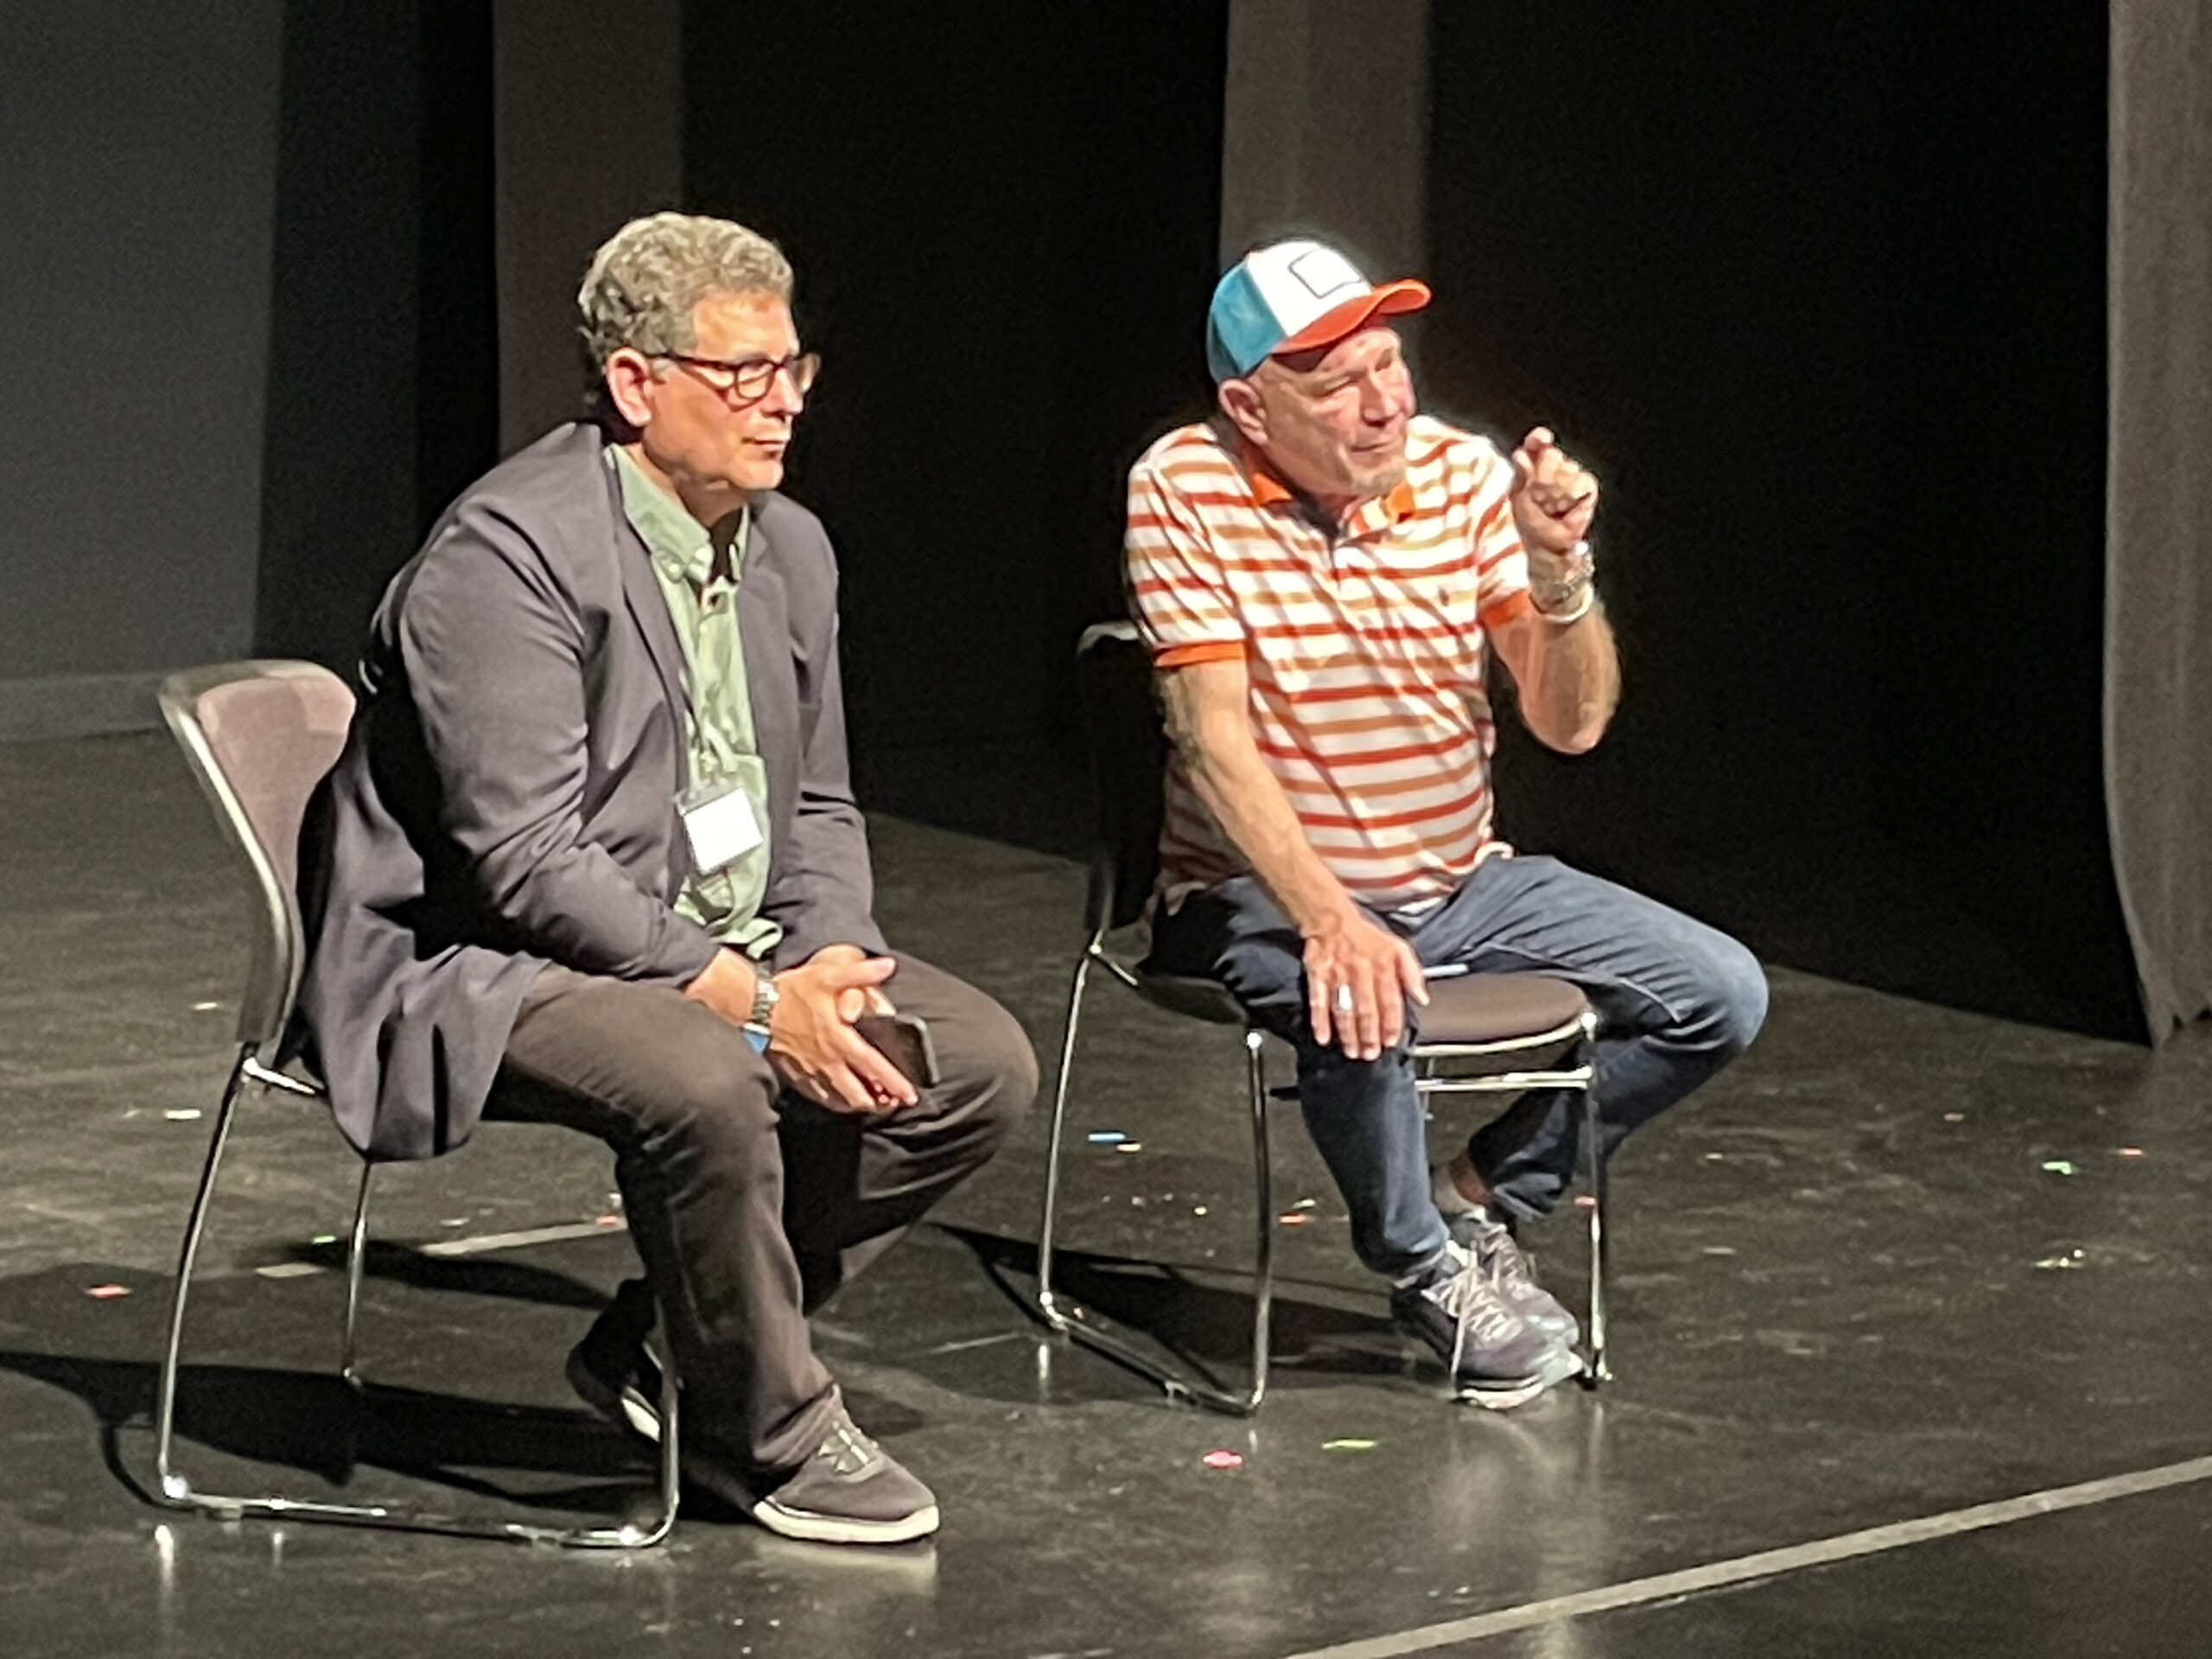 Lee Gundersheimer and Gary Garrison at post-show Q&A session